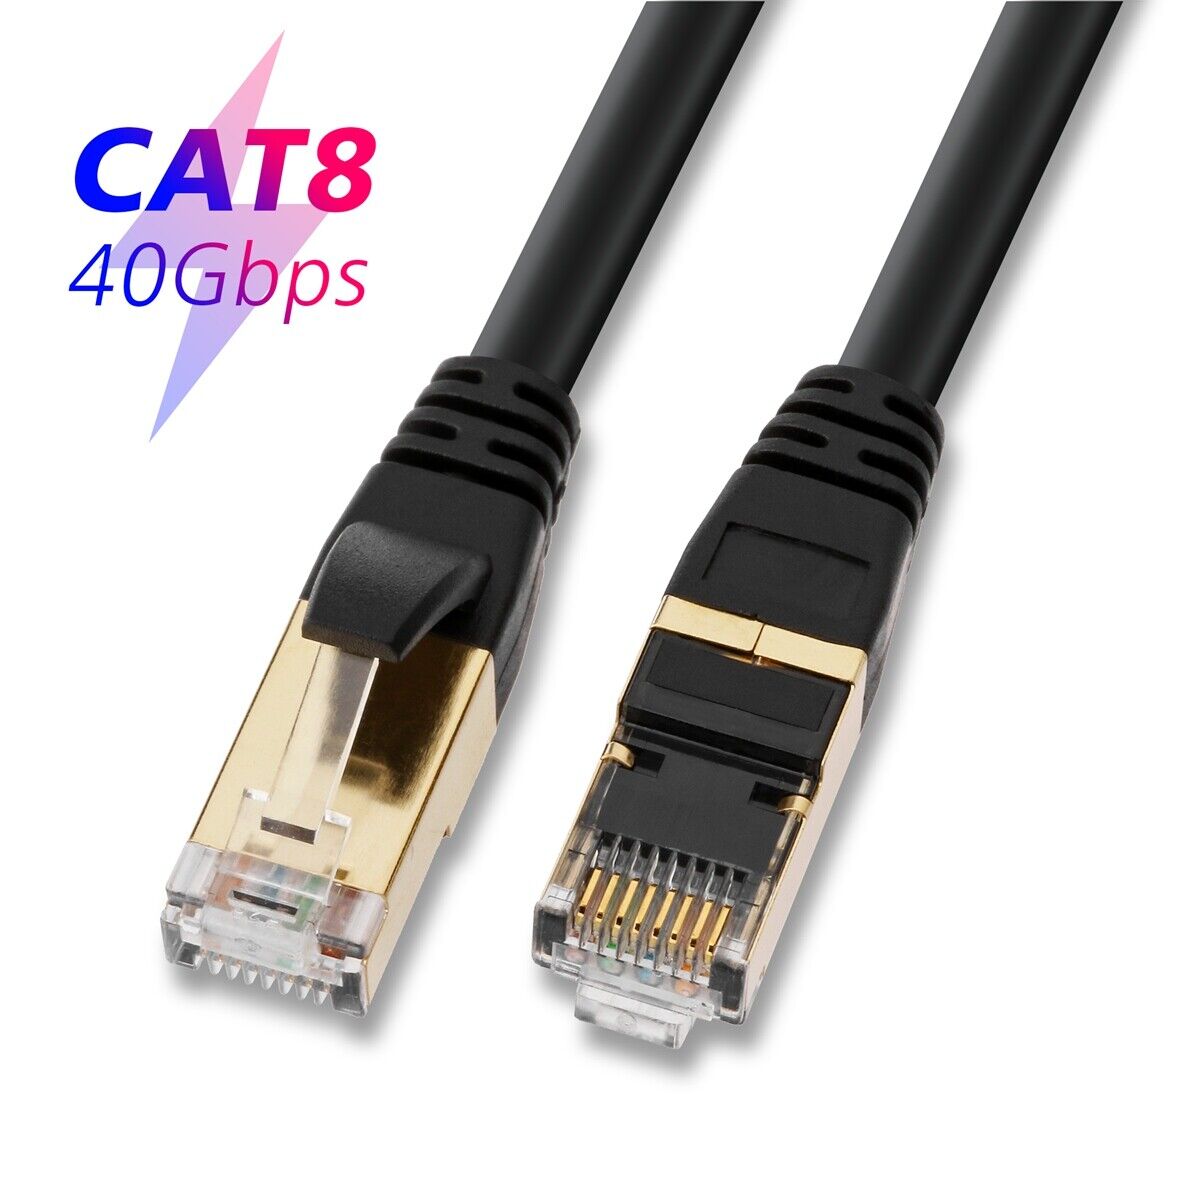 Cat 8 Cat 7 6 Ethernet Cable Shielded, Internet Network Computer Patch Cord Lot